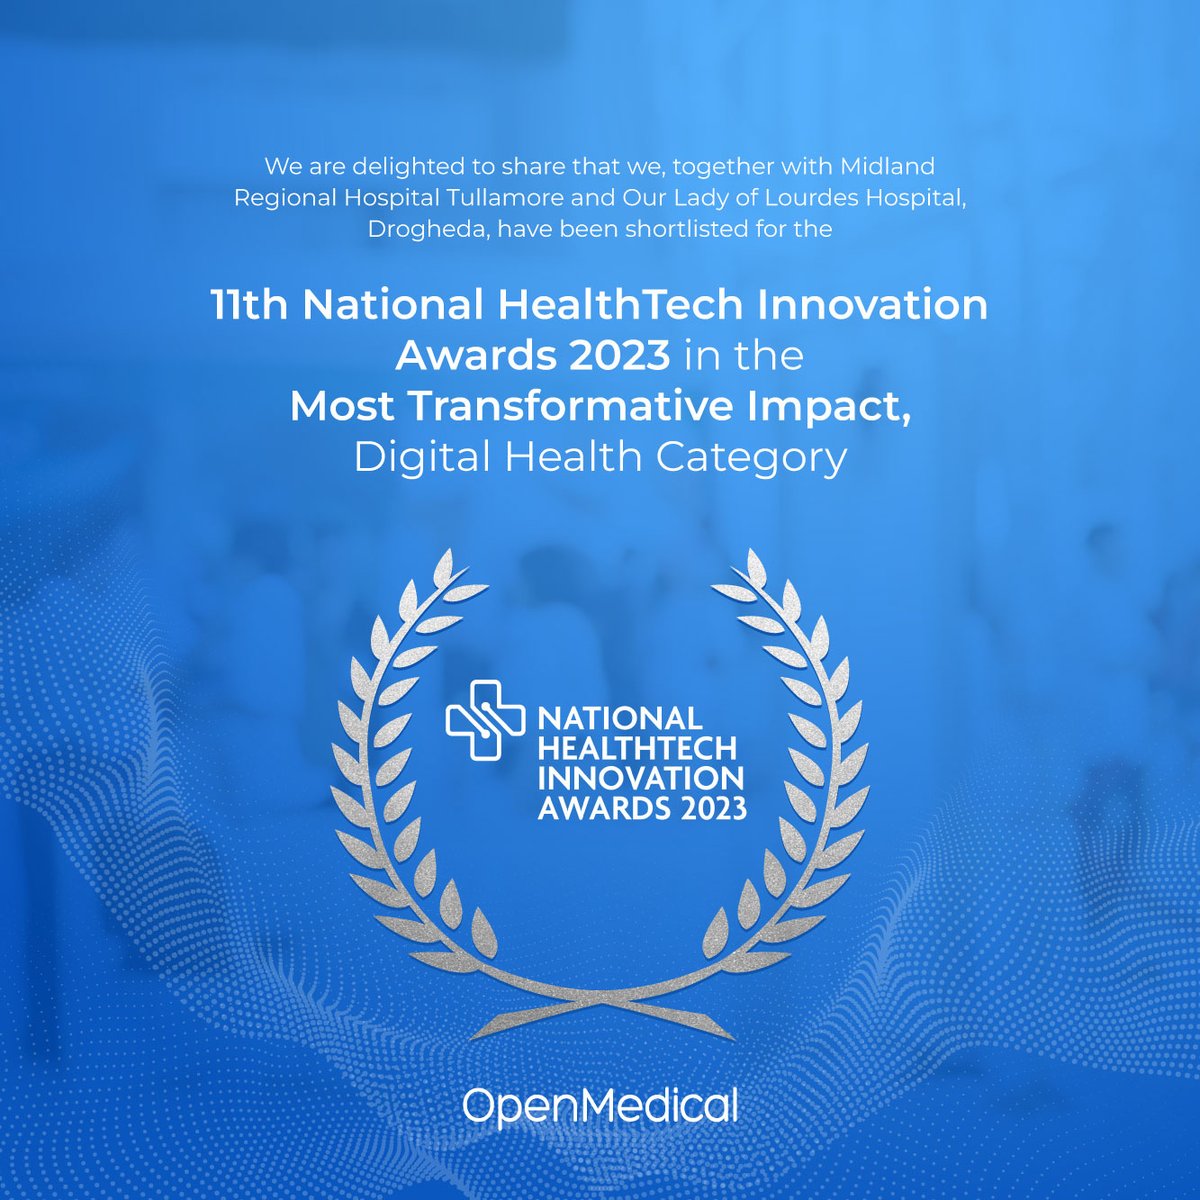 We're finalists! 🎉 Happy to share that our Pathpoint eTrauma and Virtual Fracture Assessment Clinic (VFAC) has been shortlisted for the 11th National @HealthTech_IRL Innovation Awards 2023 for the 'Most Transformative Impact - Digital Health' category. #HealthTechIrelandAwards